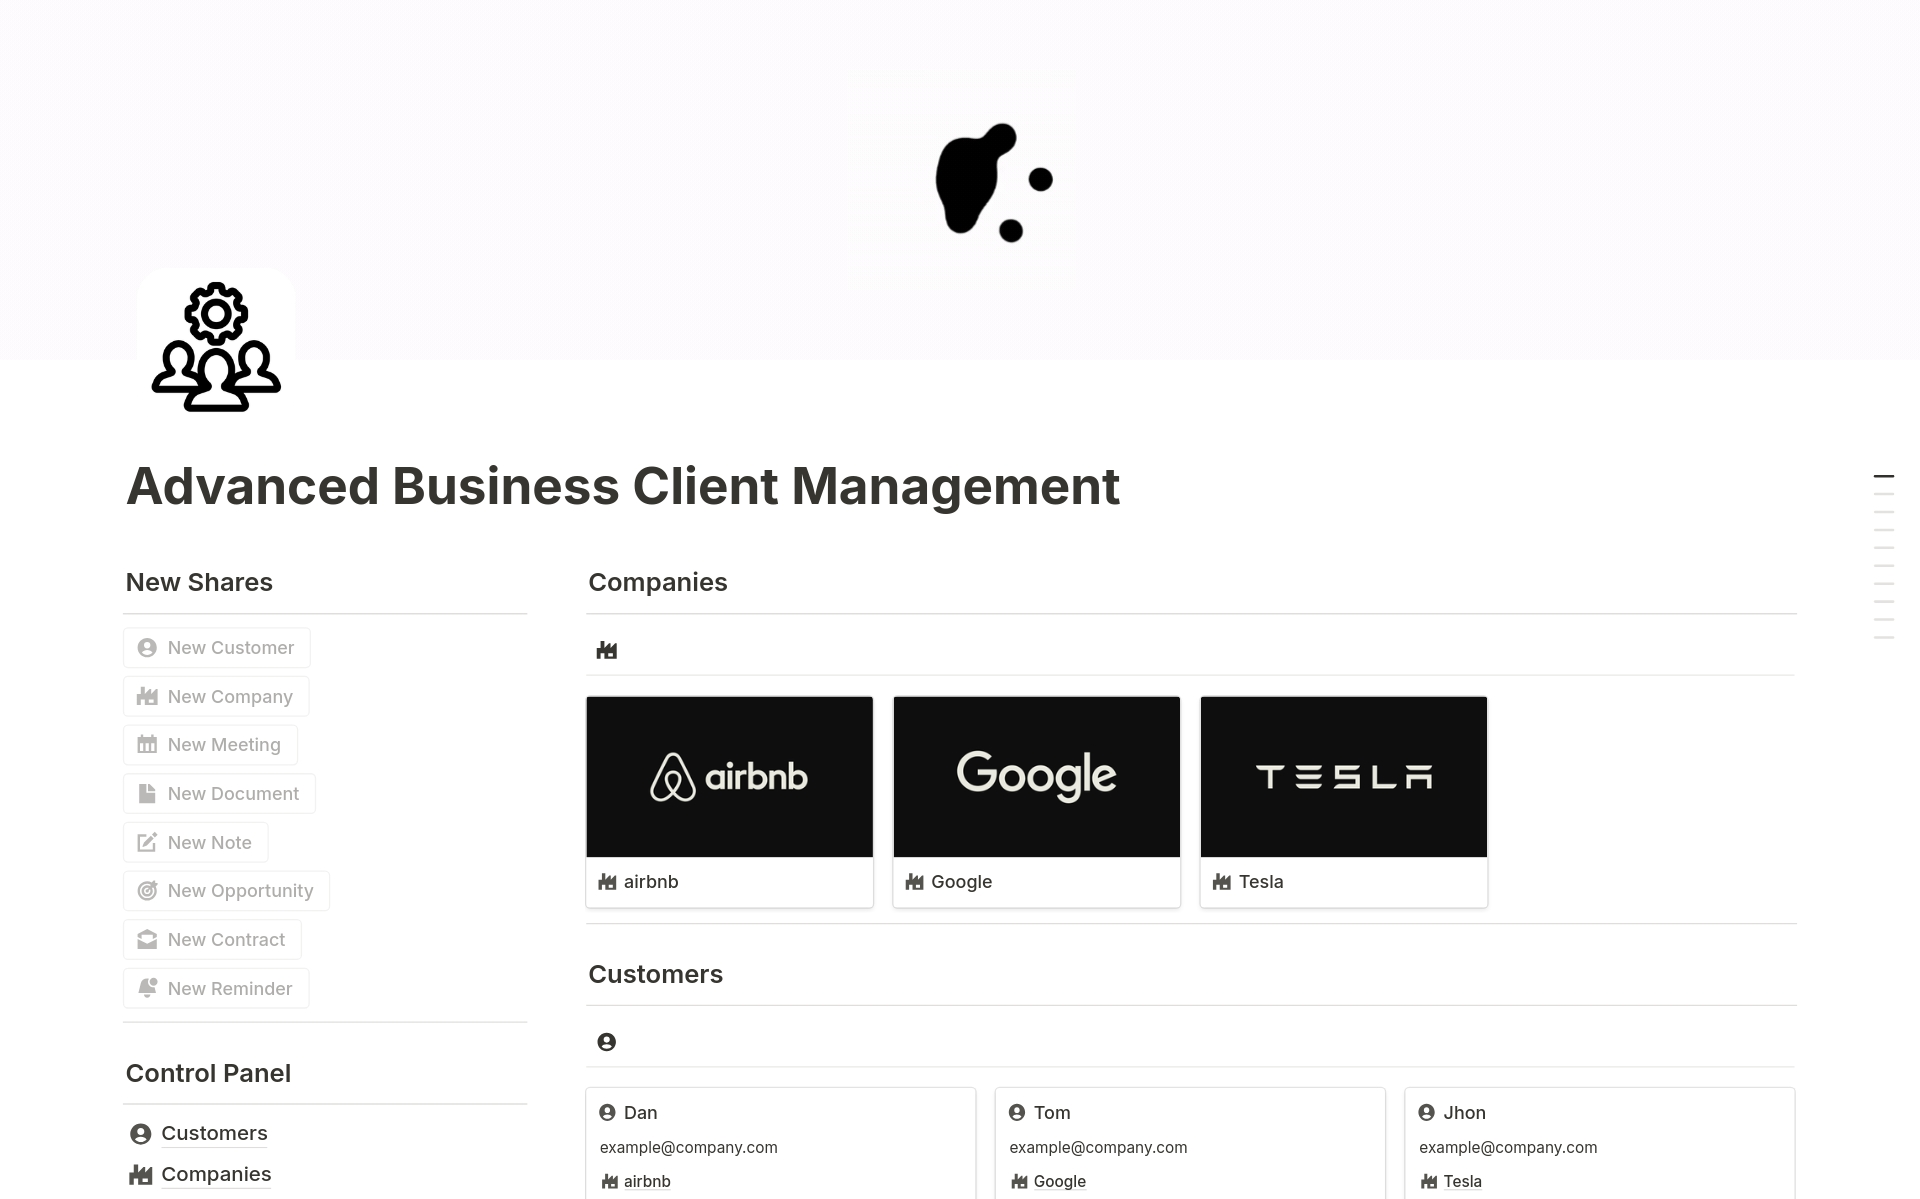 Enhance your client management with our Advanced Business Client Management template in Notion. Ideal for large companies.